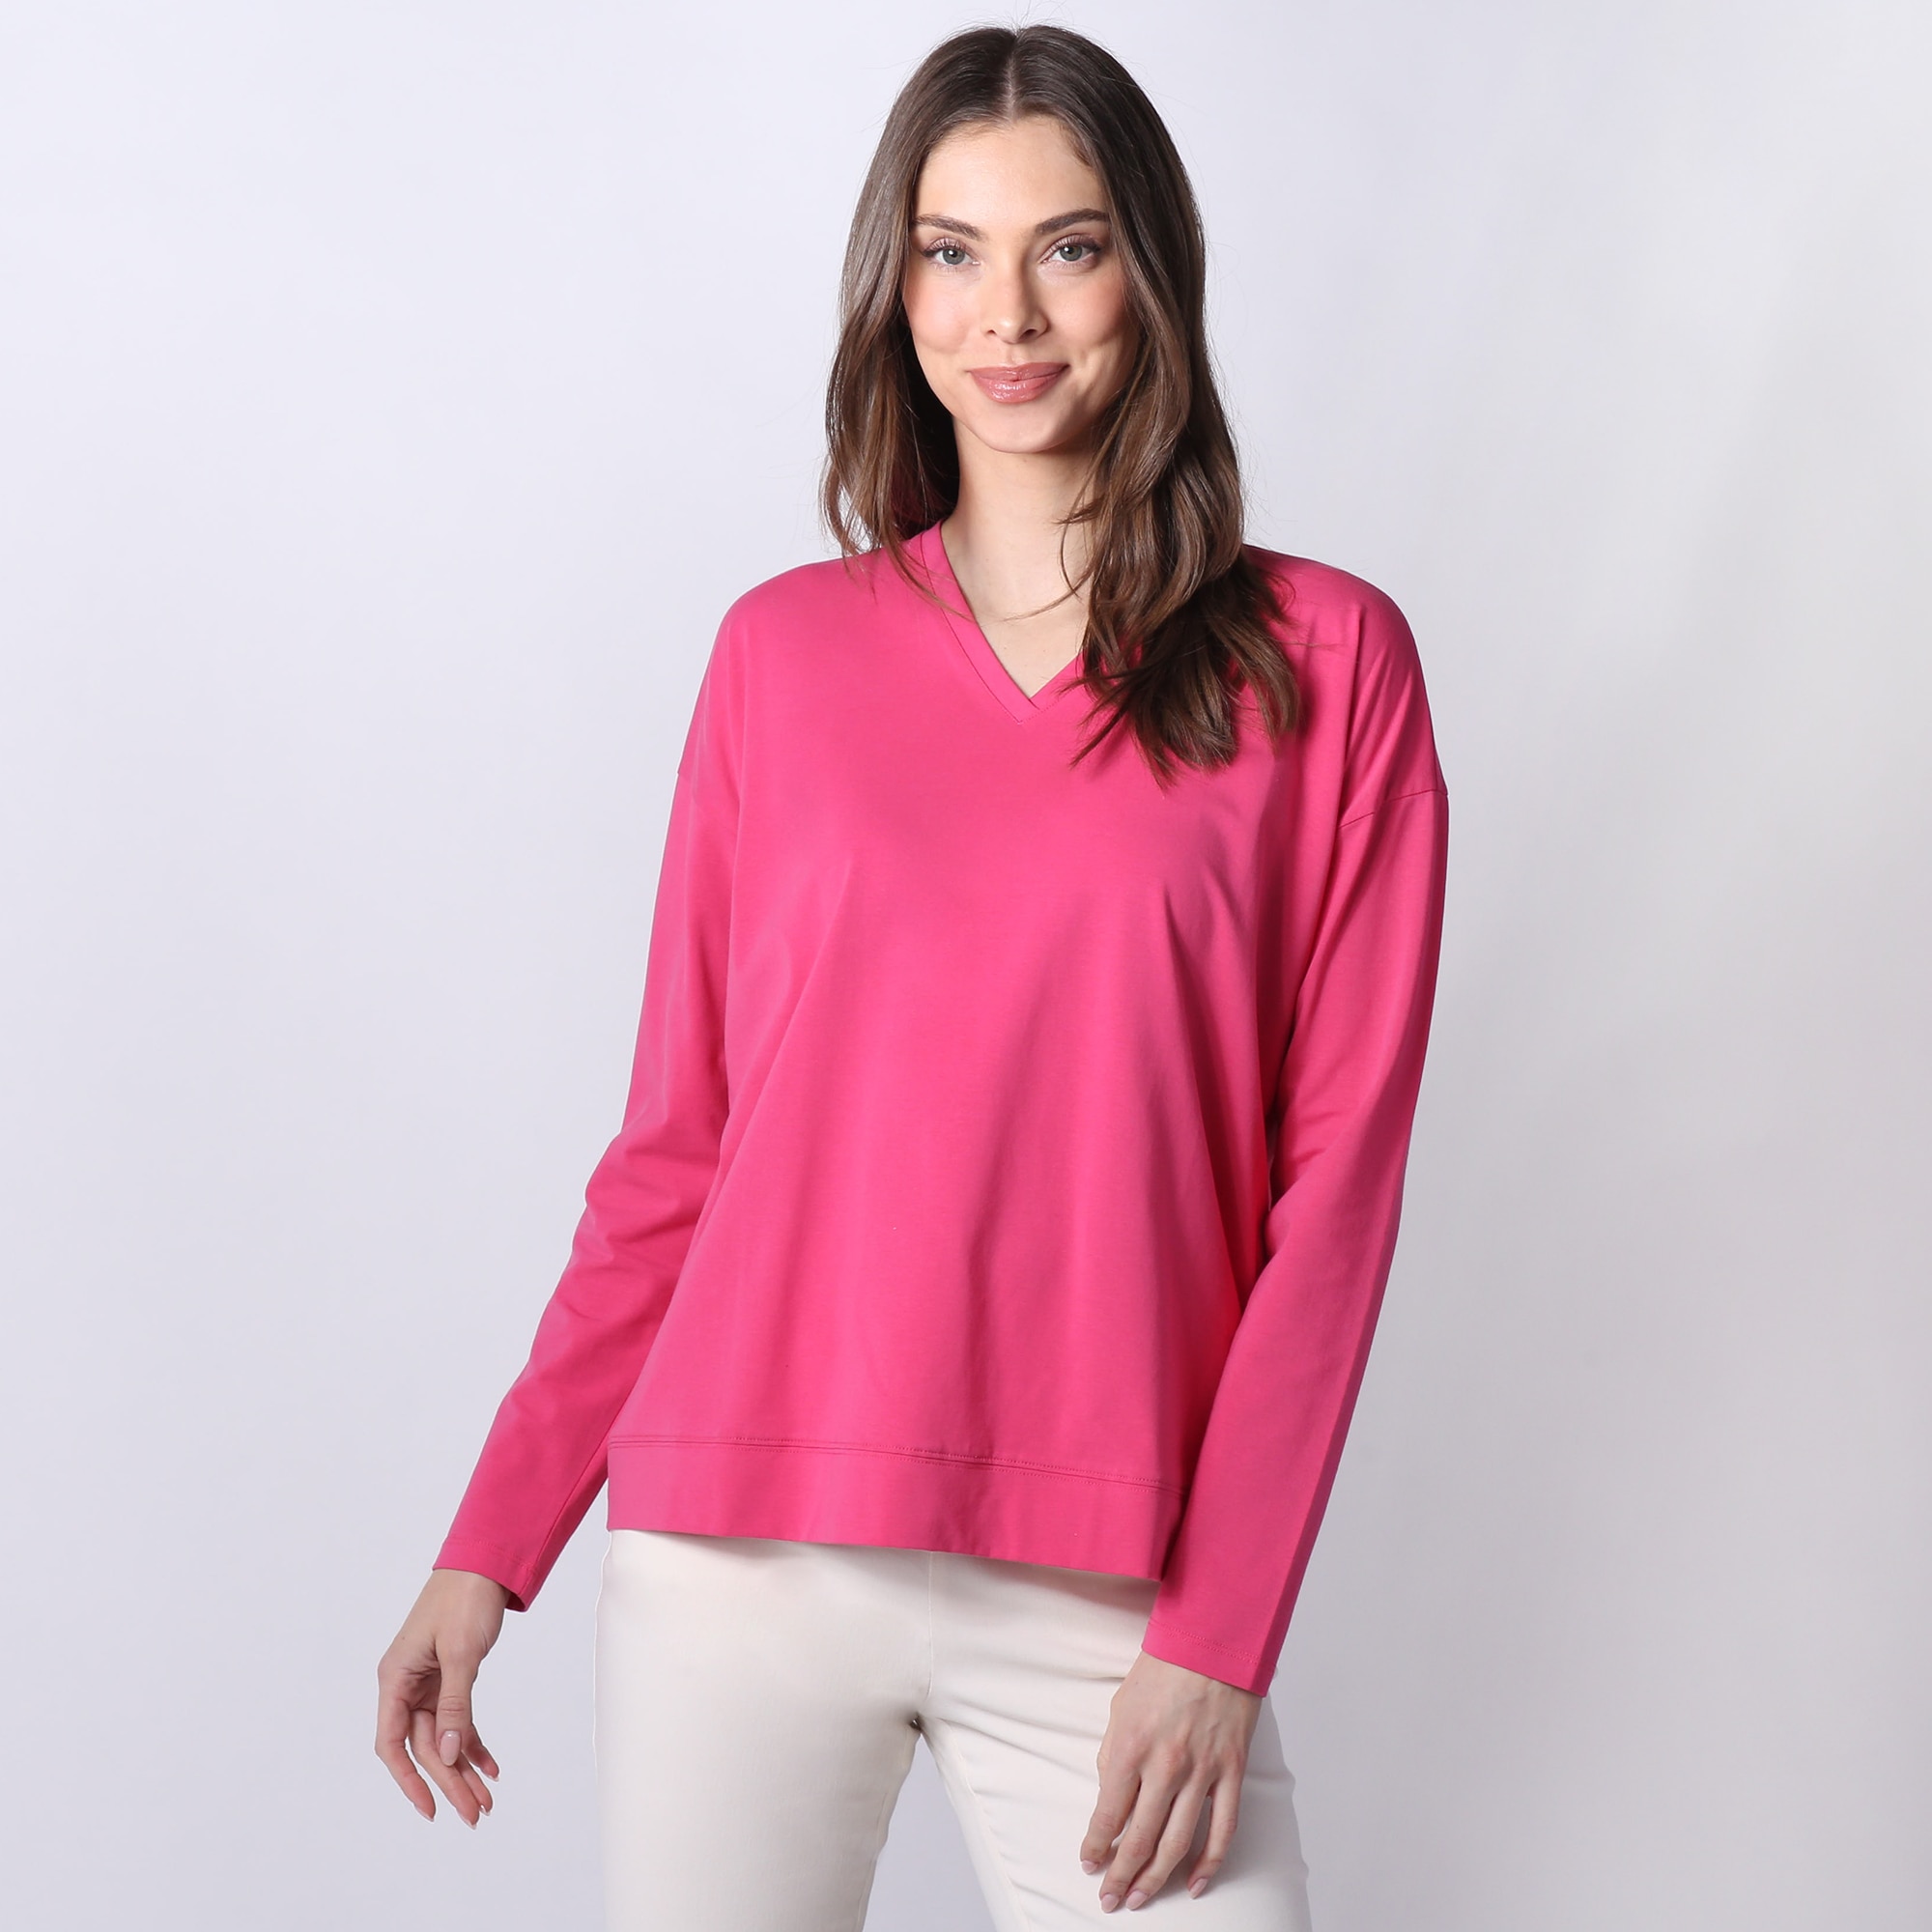 Wynne Style V-Neck Boxy Long Sleeve Tee Cotton Span Top